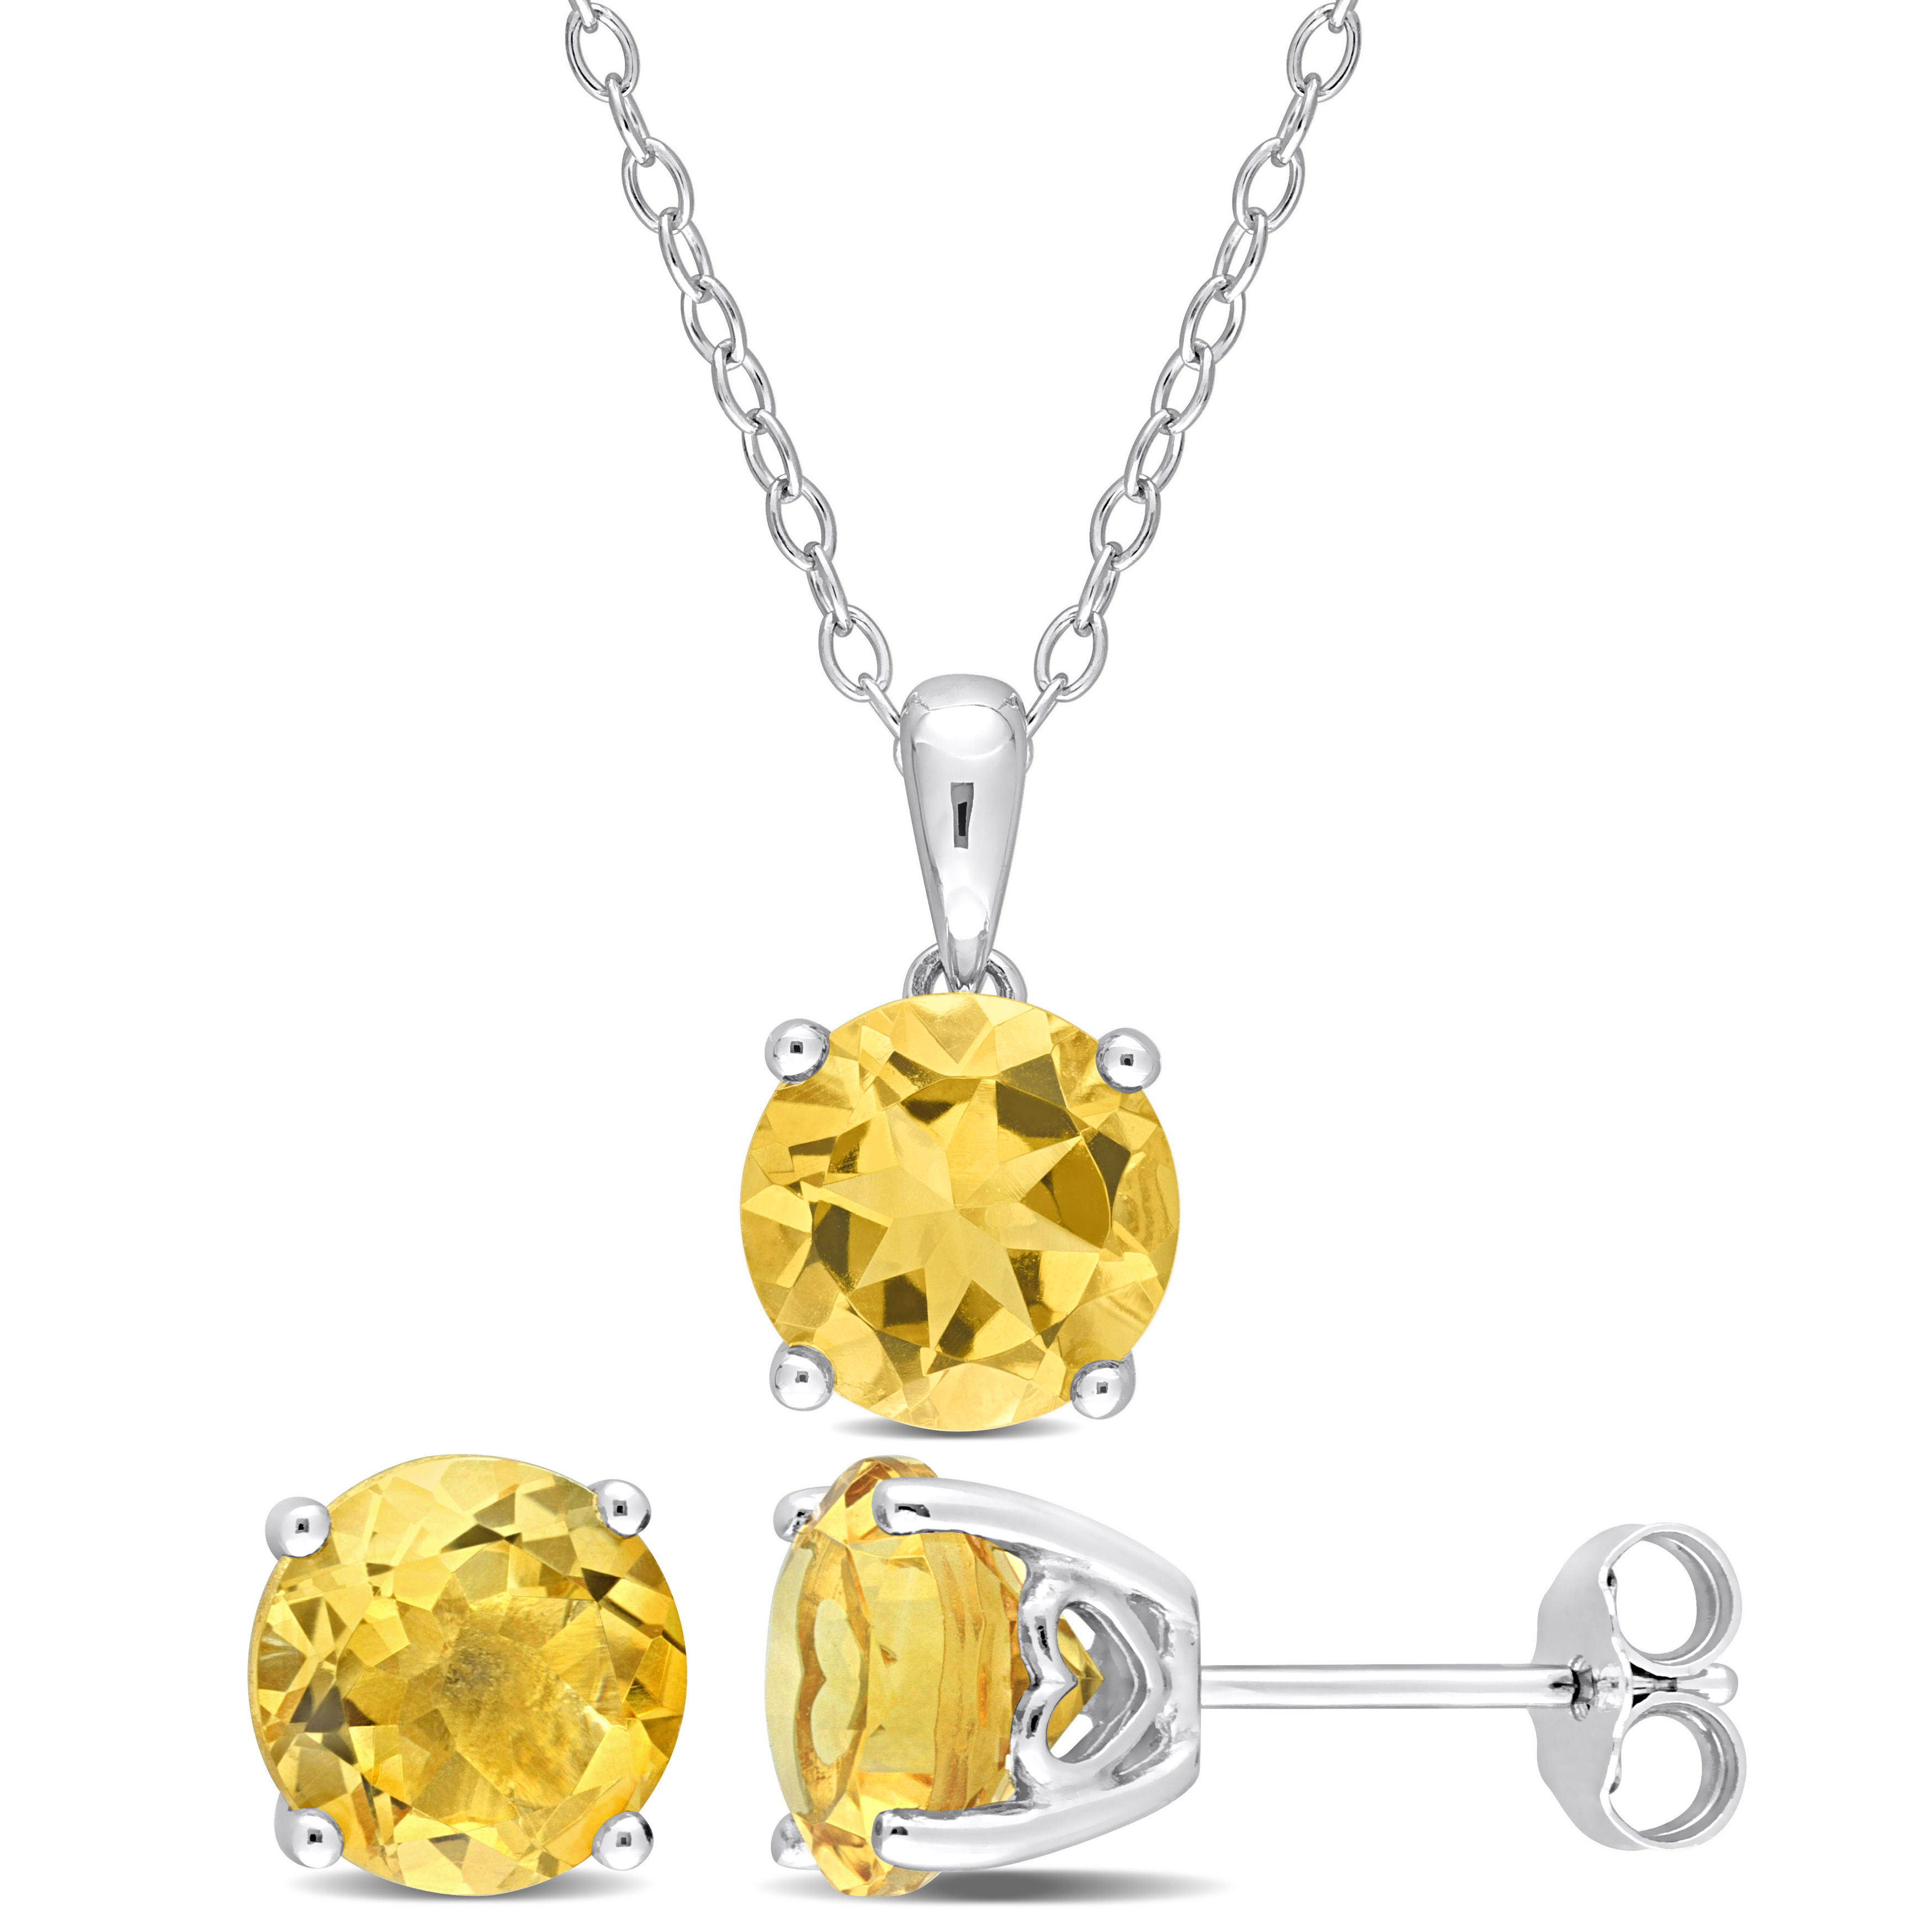 5 3/5 CT TGW Citrine 2-Piece Set of Pendant with Chain and Earrings in Sterling Silver